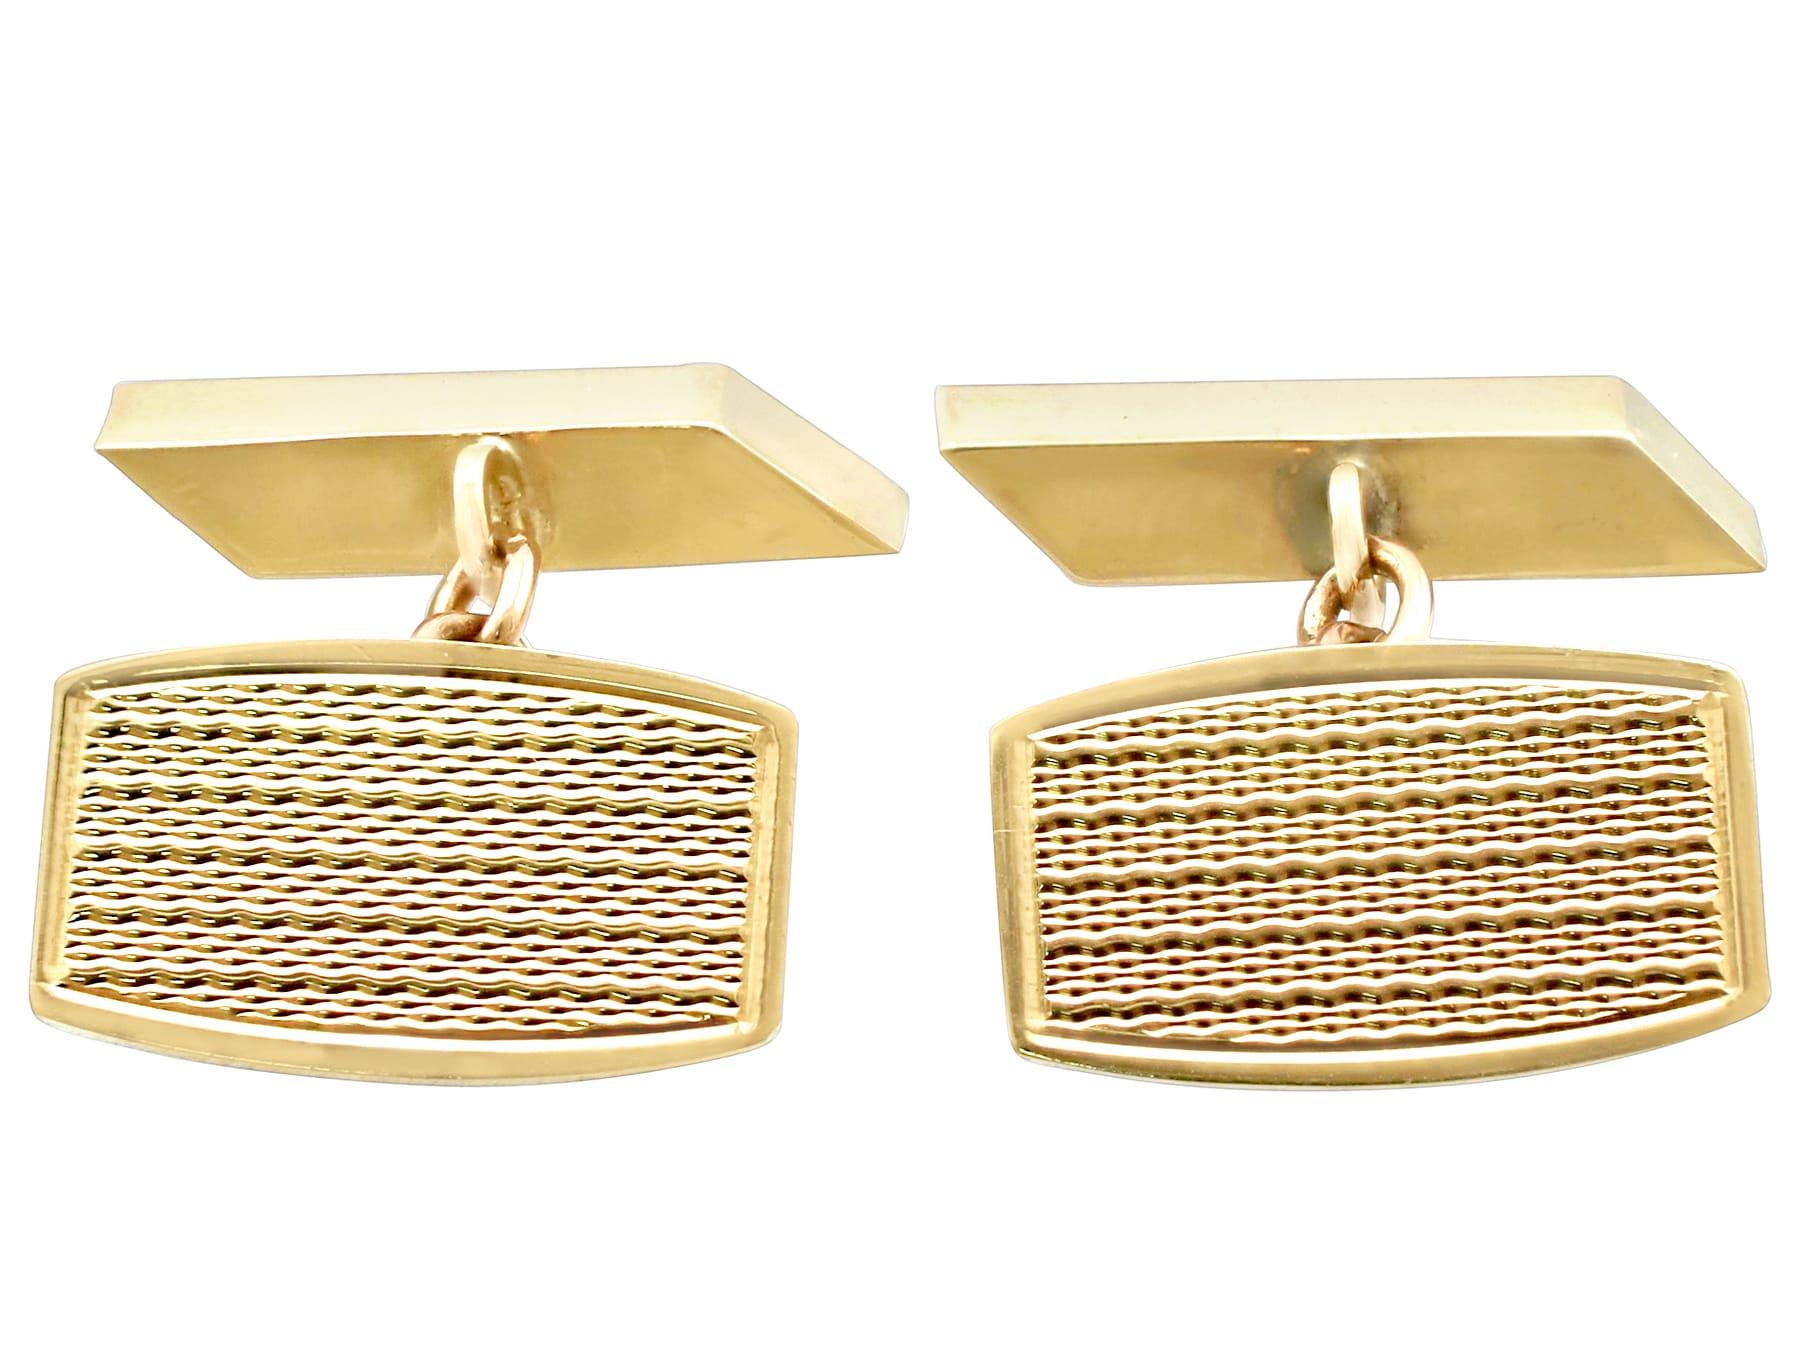 A fine pair of vintage English 9 karat yellow gold cufflinks; part of our men's jewelry and estate jewelry collections.

These fine vintage cufflinks have been crafted in 9k yellow gold.

The anterior link of these men's 9k gold cufflinks have a